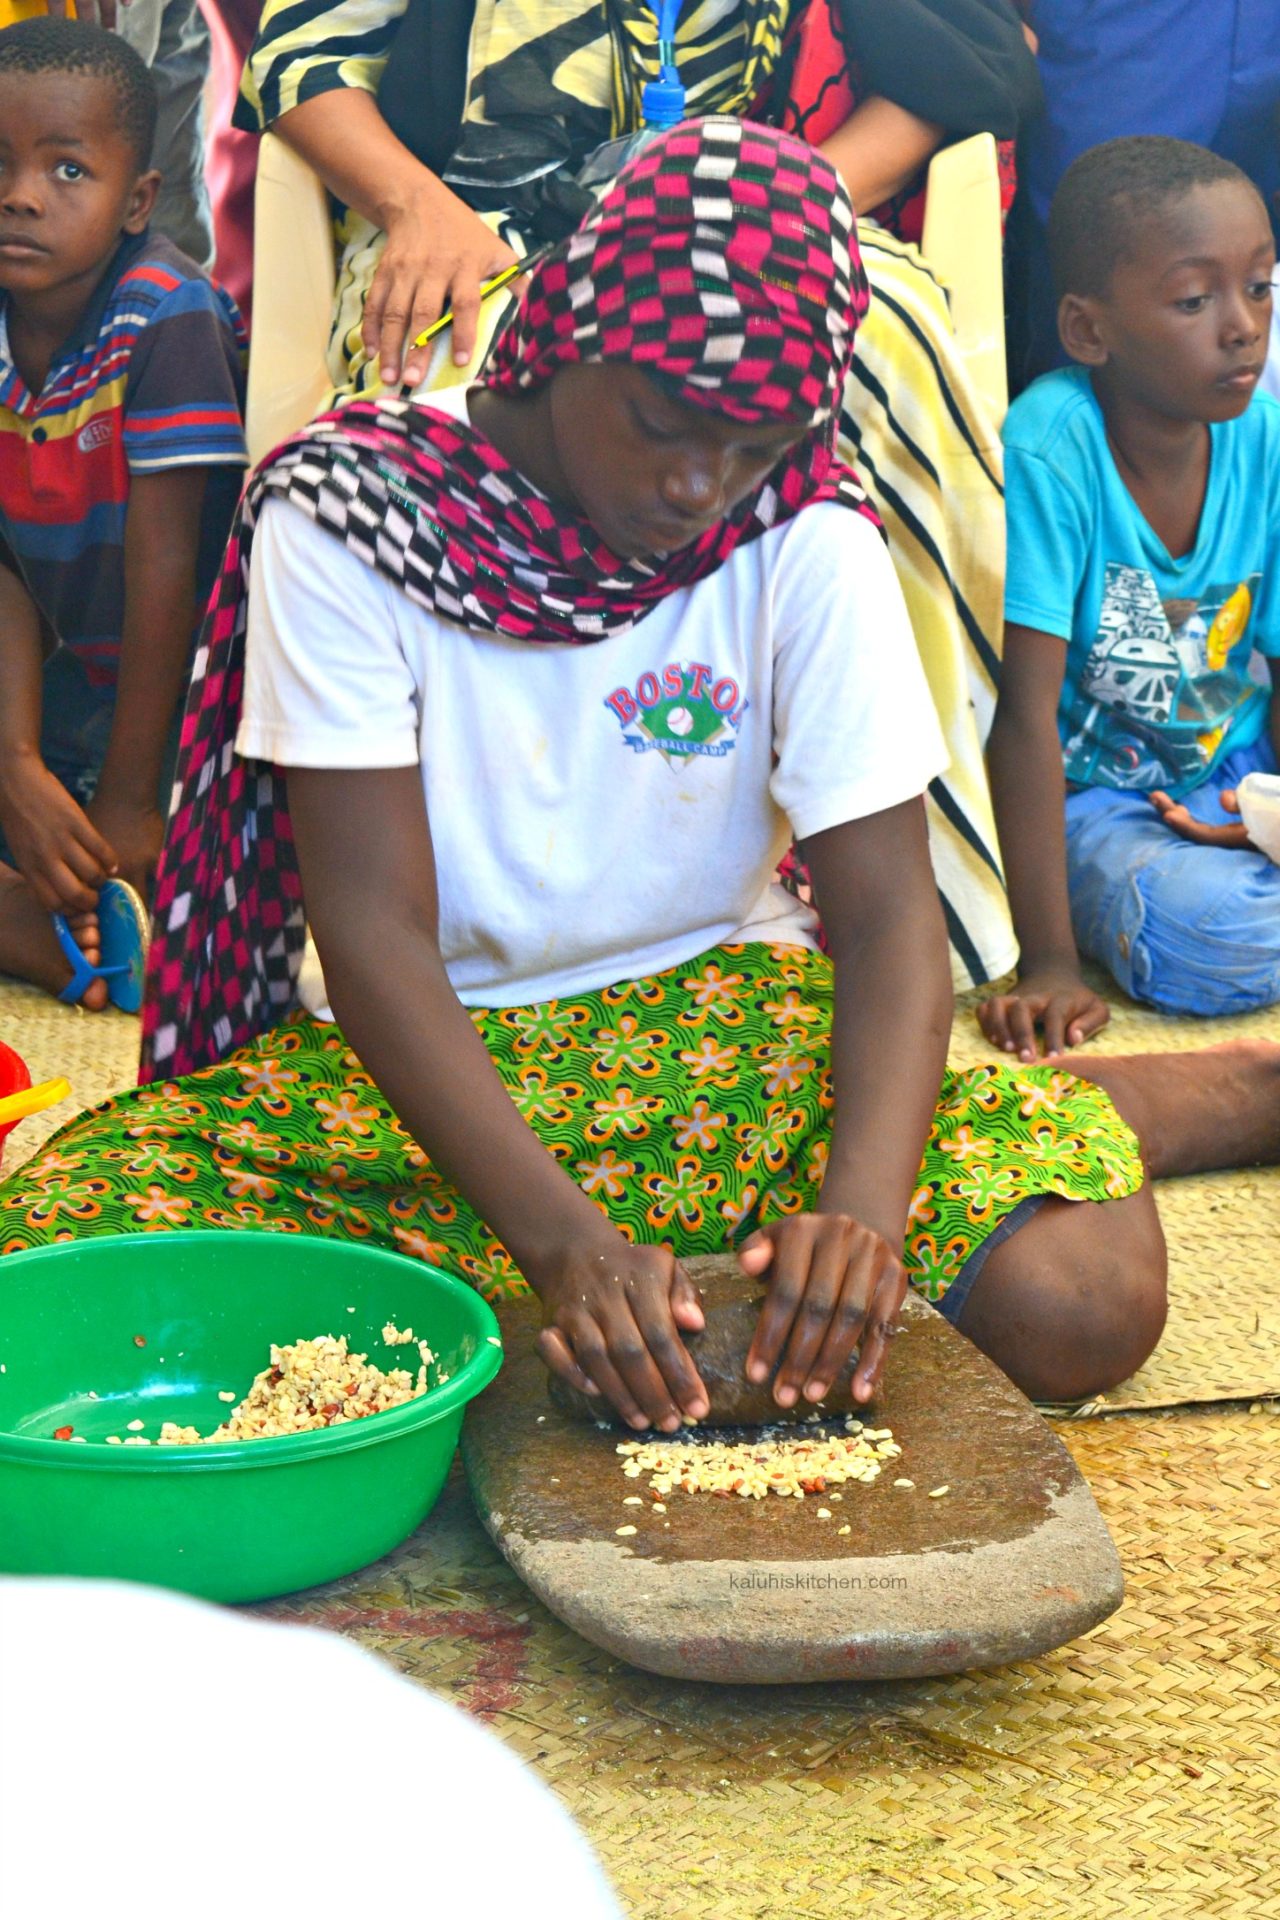 preparation of bhajia in the true coastal style by local youth at the lamu food festival_kaluhiskitchen.com